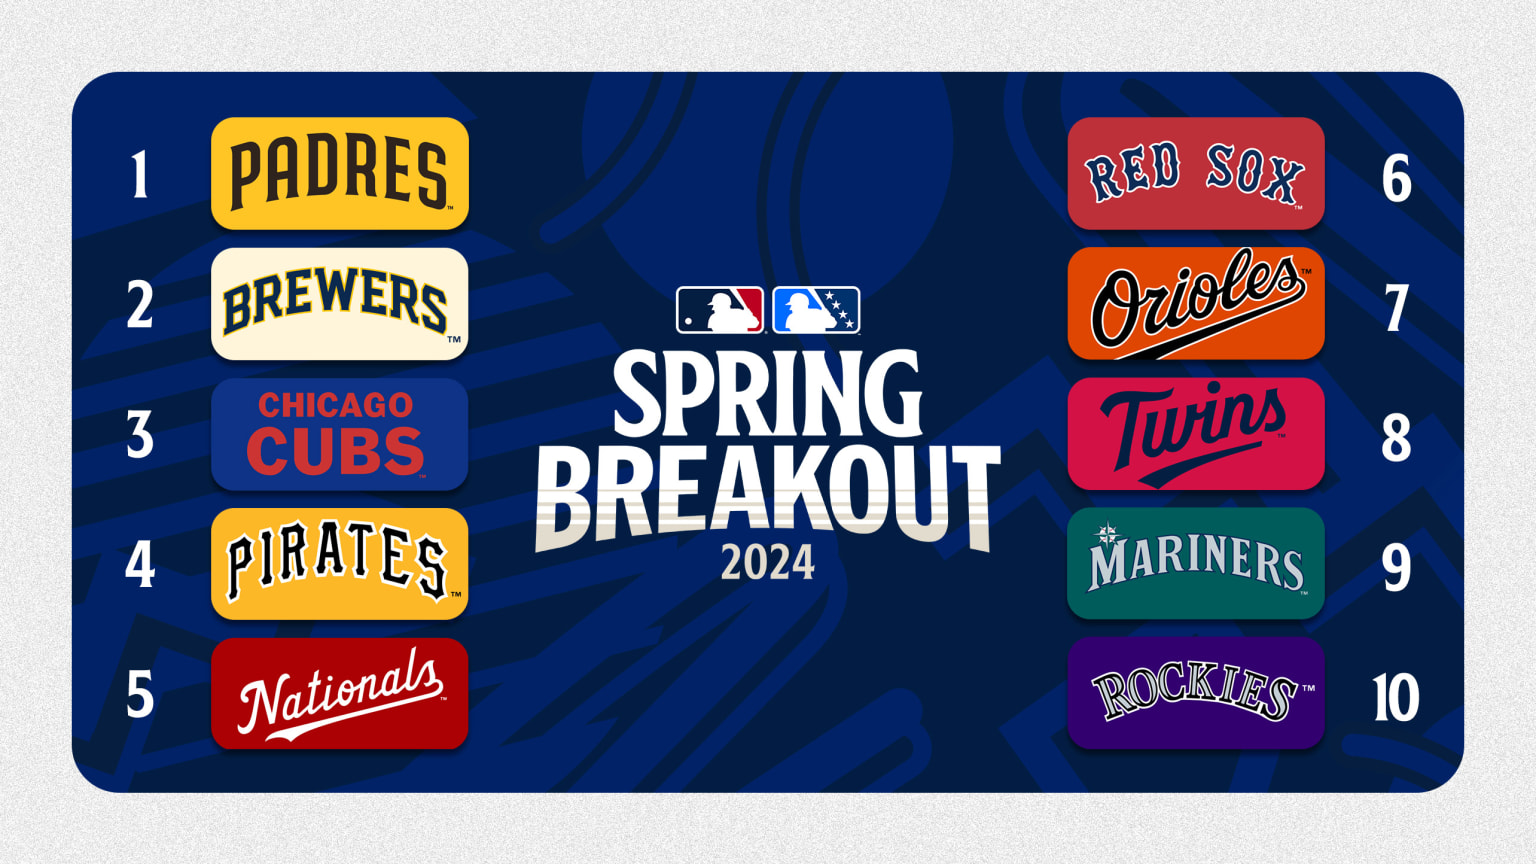 Logo for Spring Breakout with team rankings